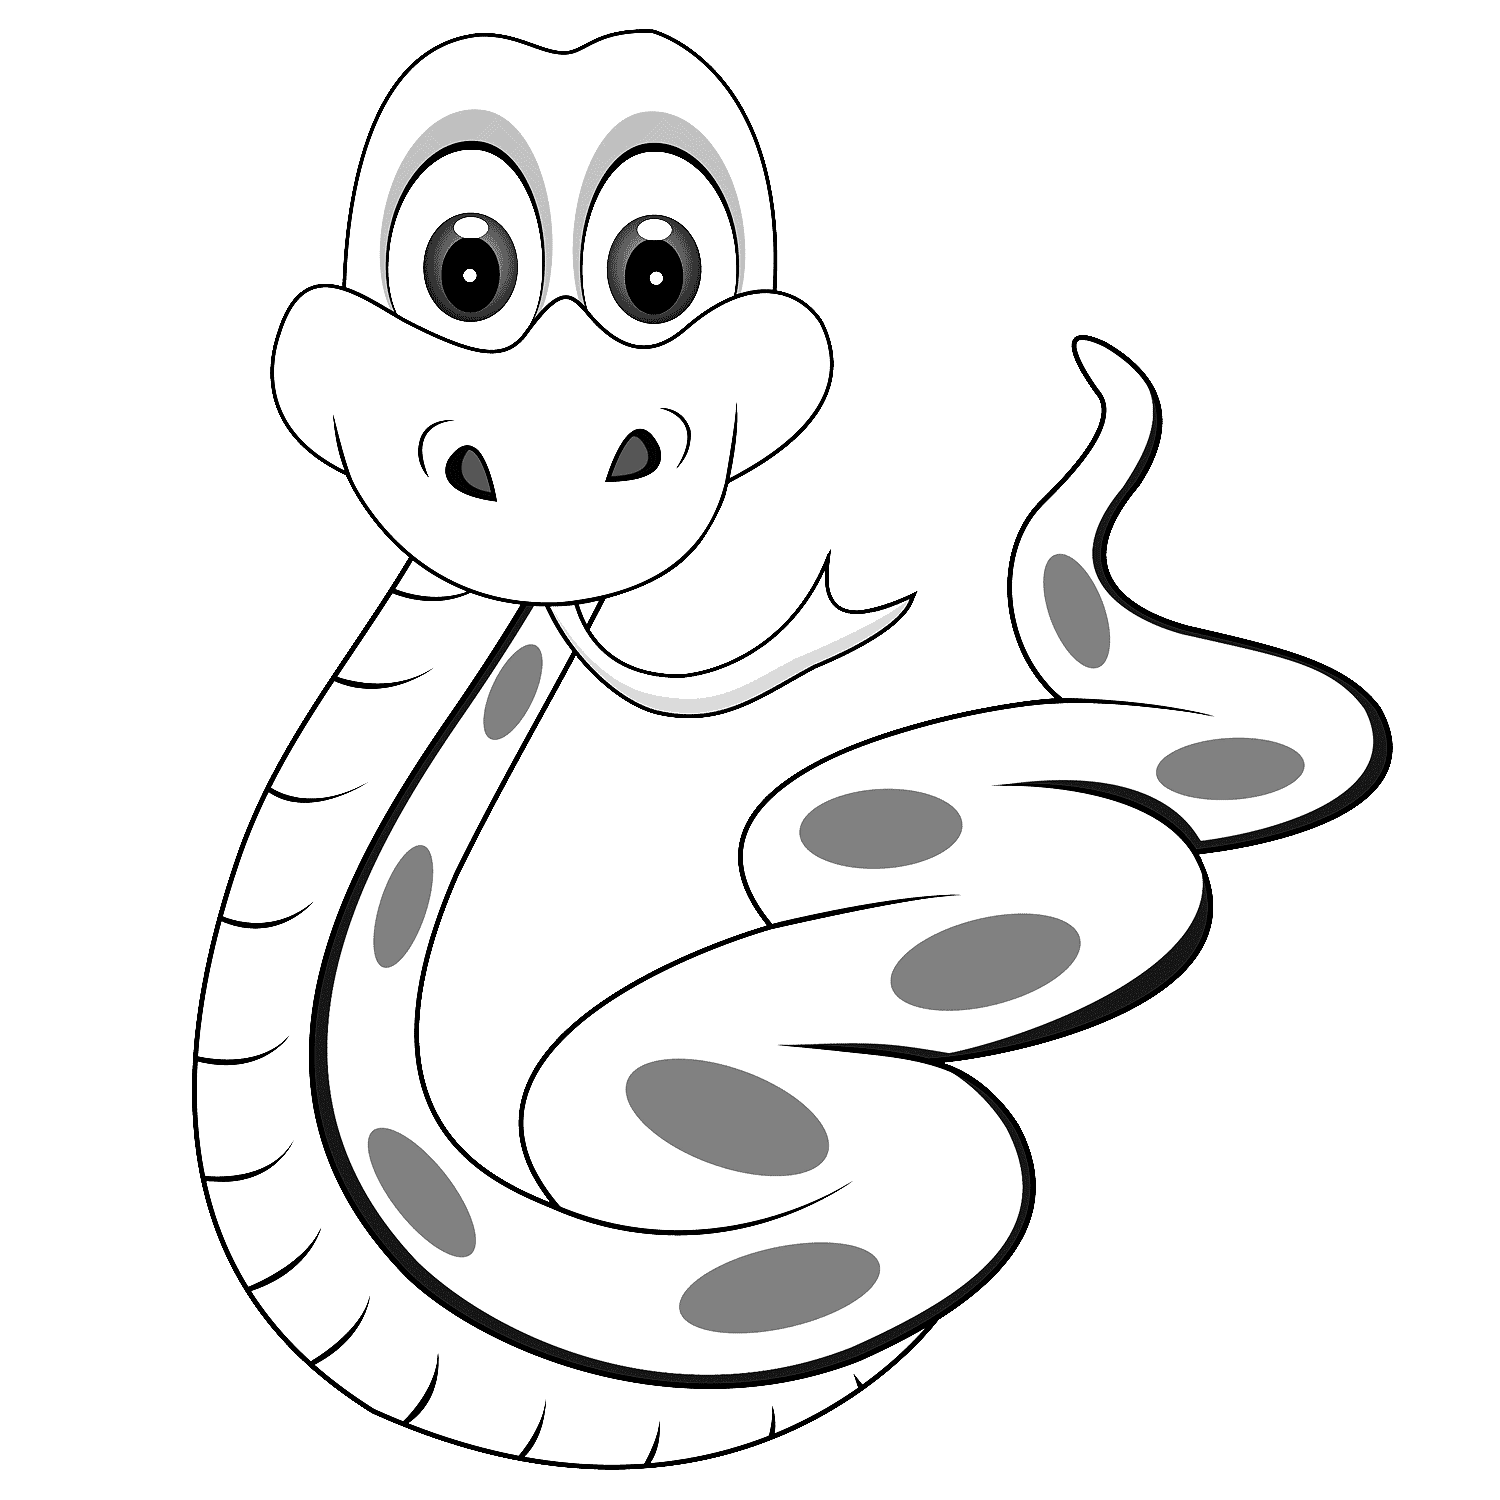 Snake coloring pages to download and print for free